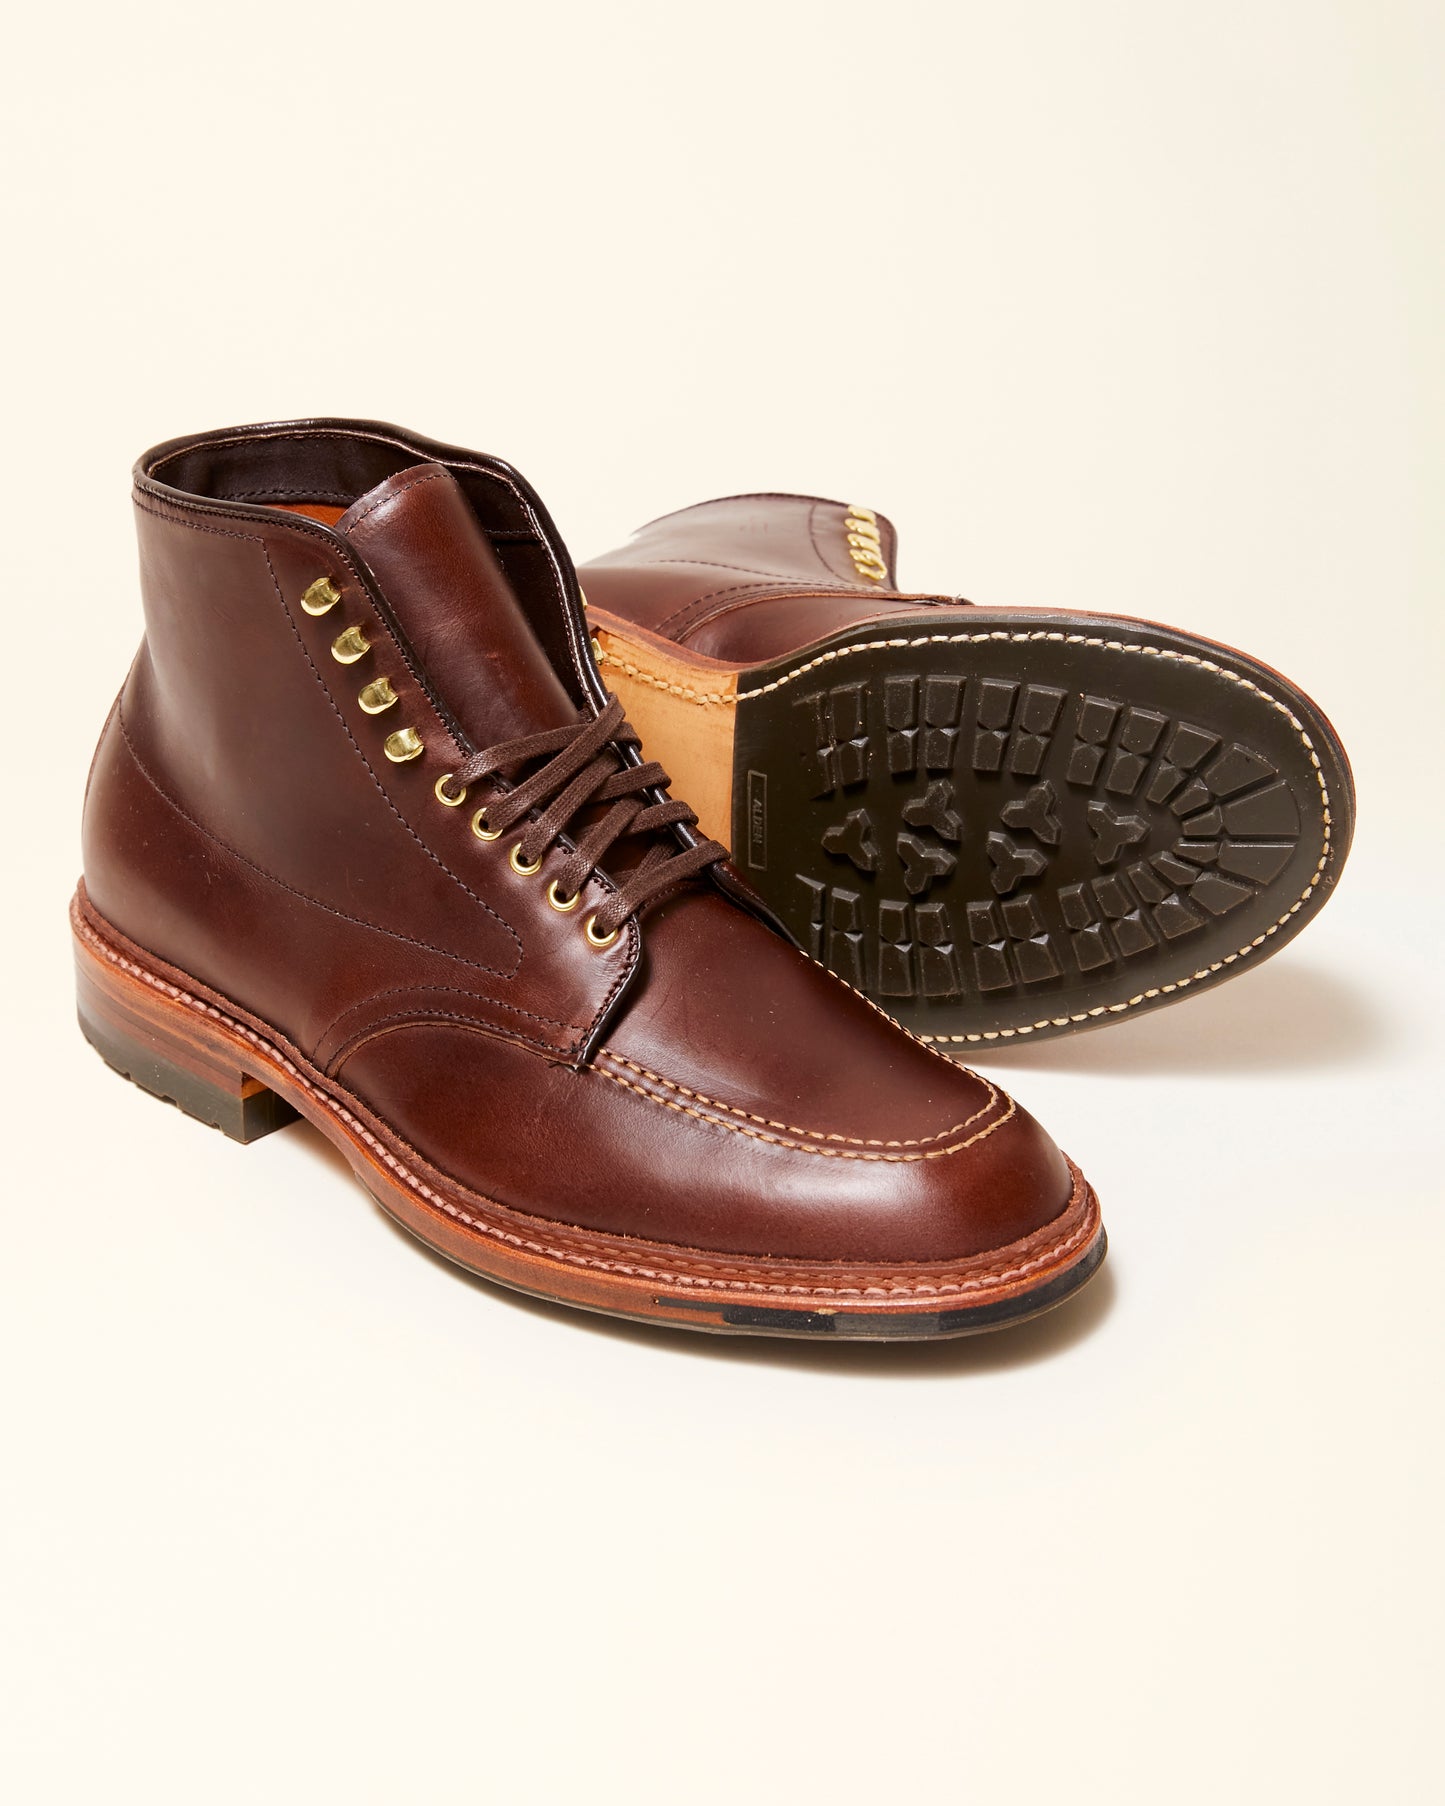 "Port Townsend" Indy Boot in Brown Chromexcel, Trubalance Last